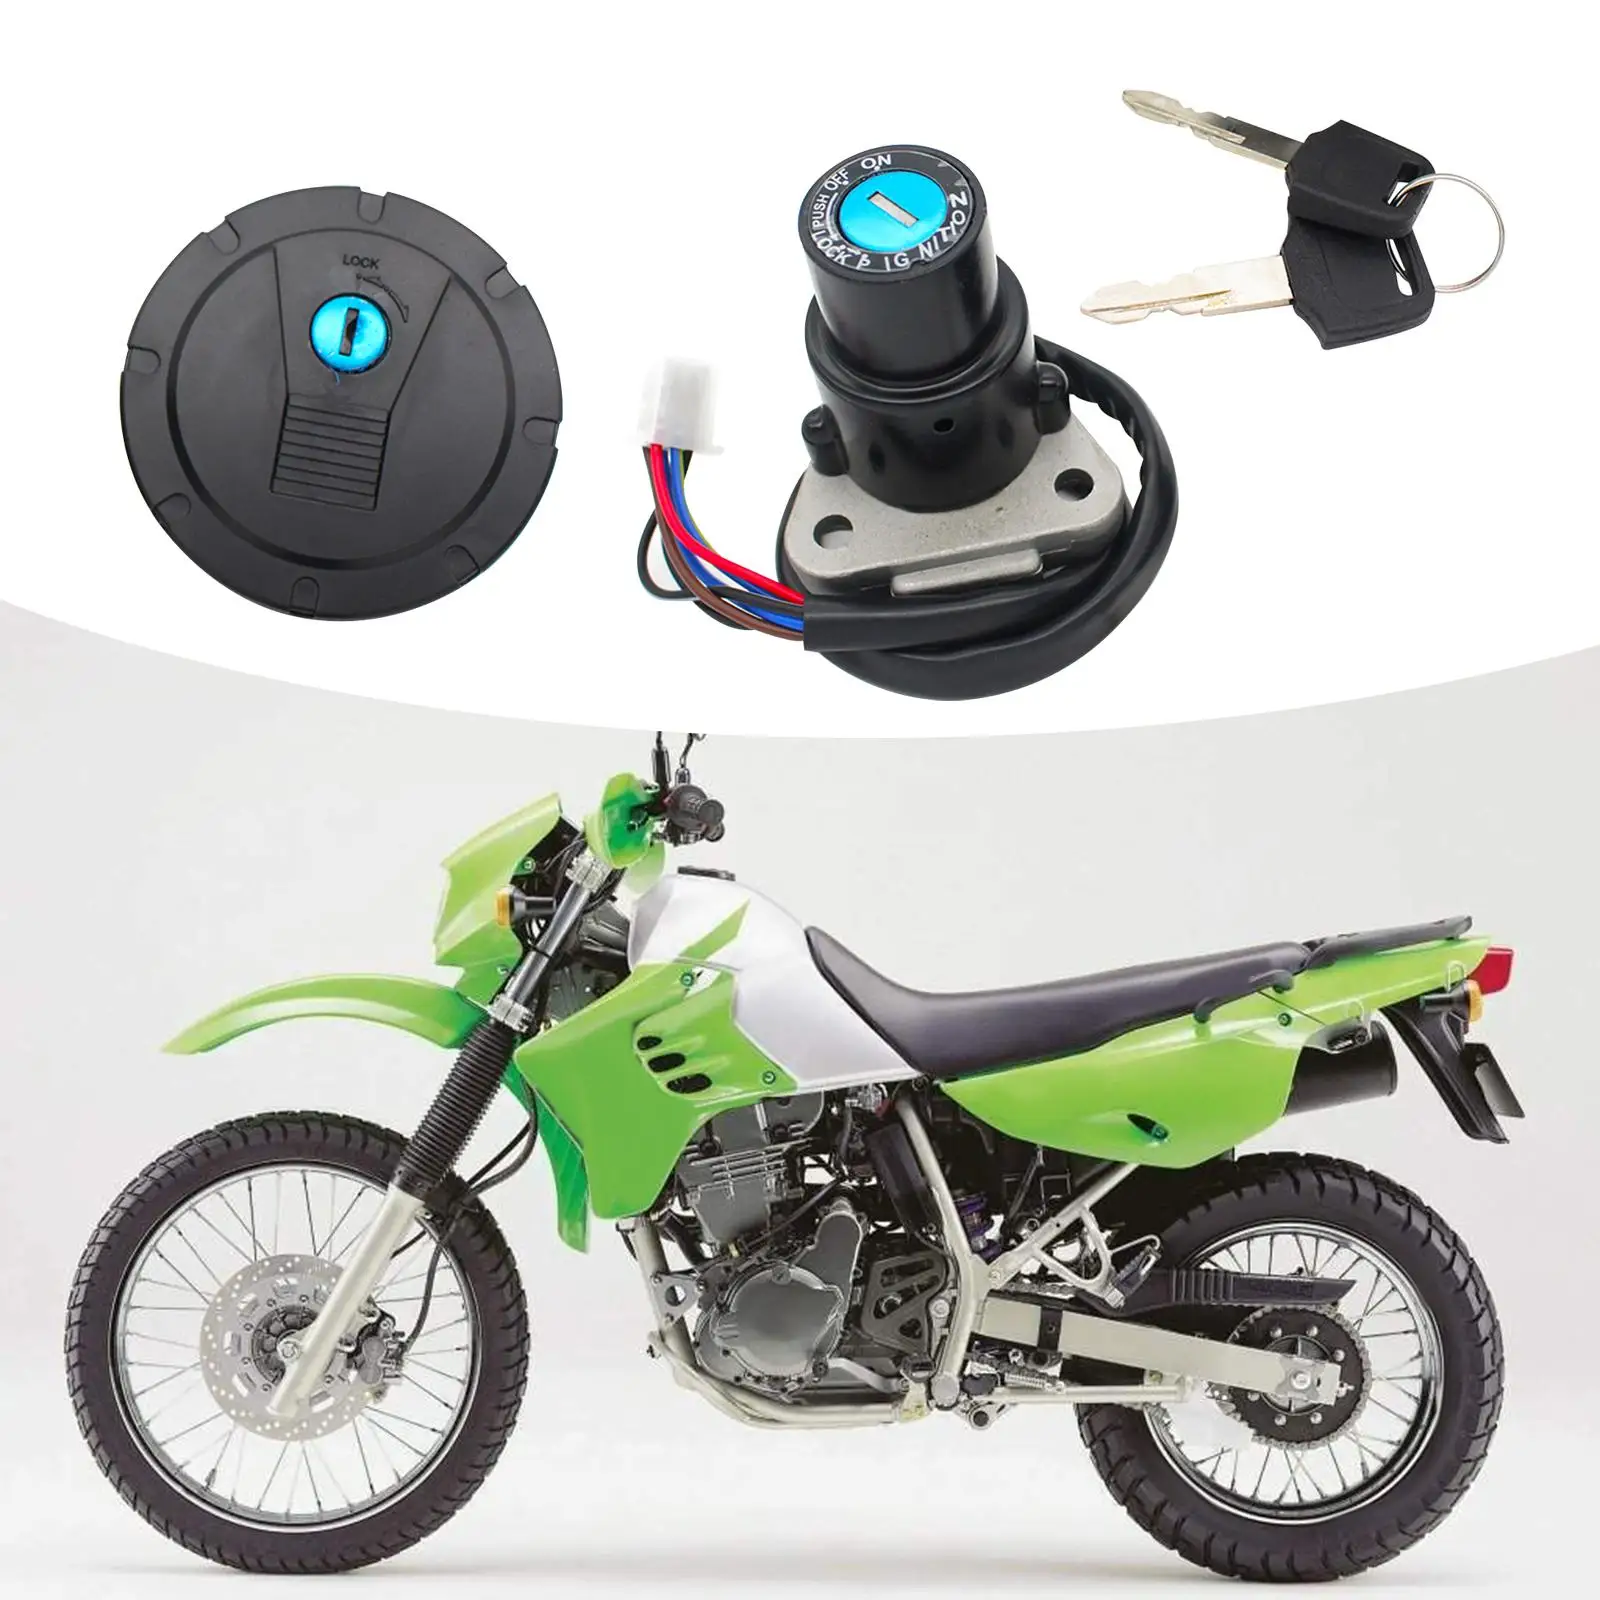 Motorcycle Ignition Switch with Key, High Performance, Durable, Spare Parts,